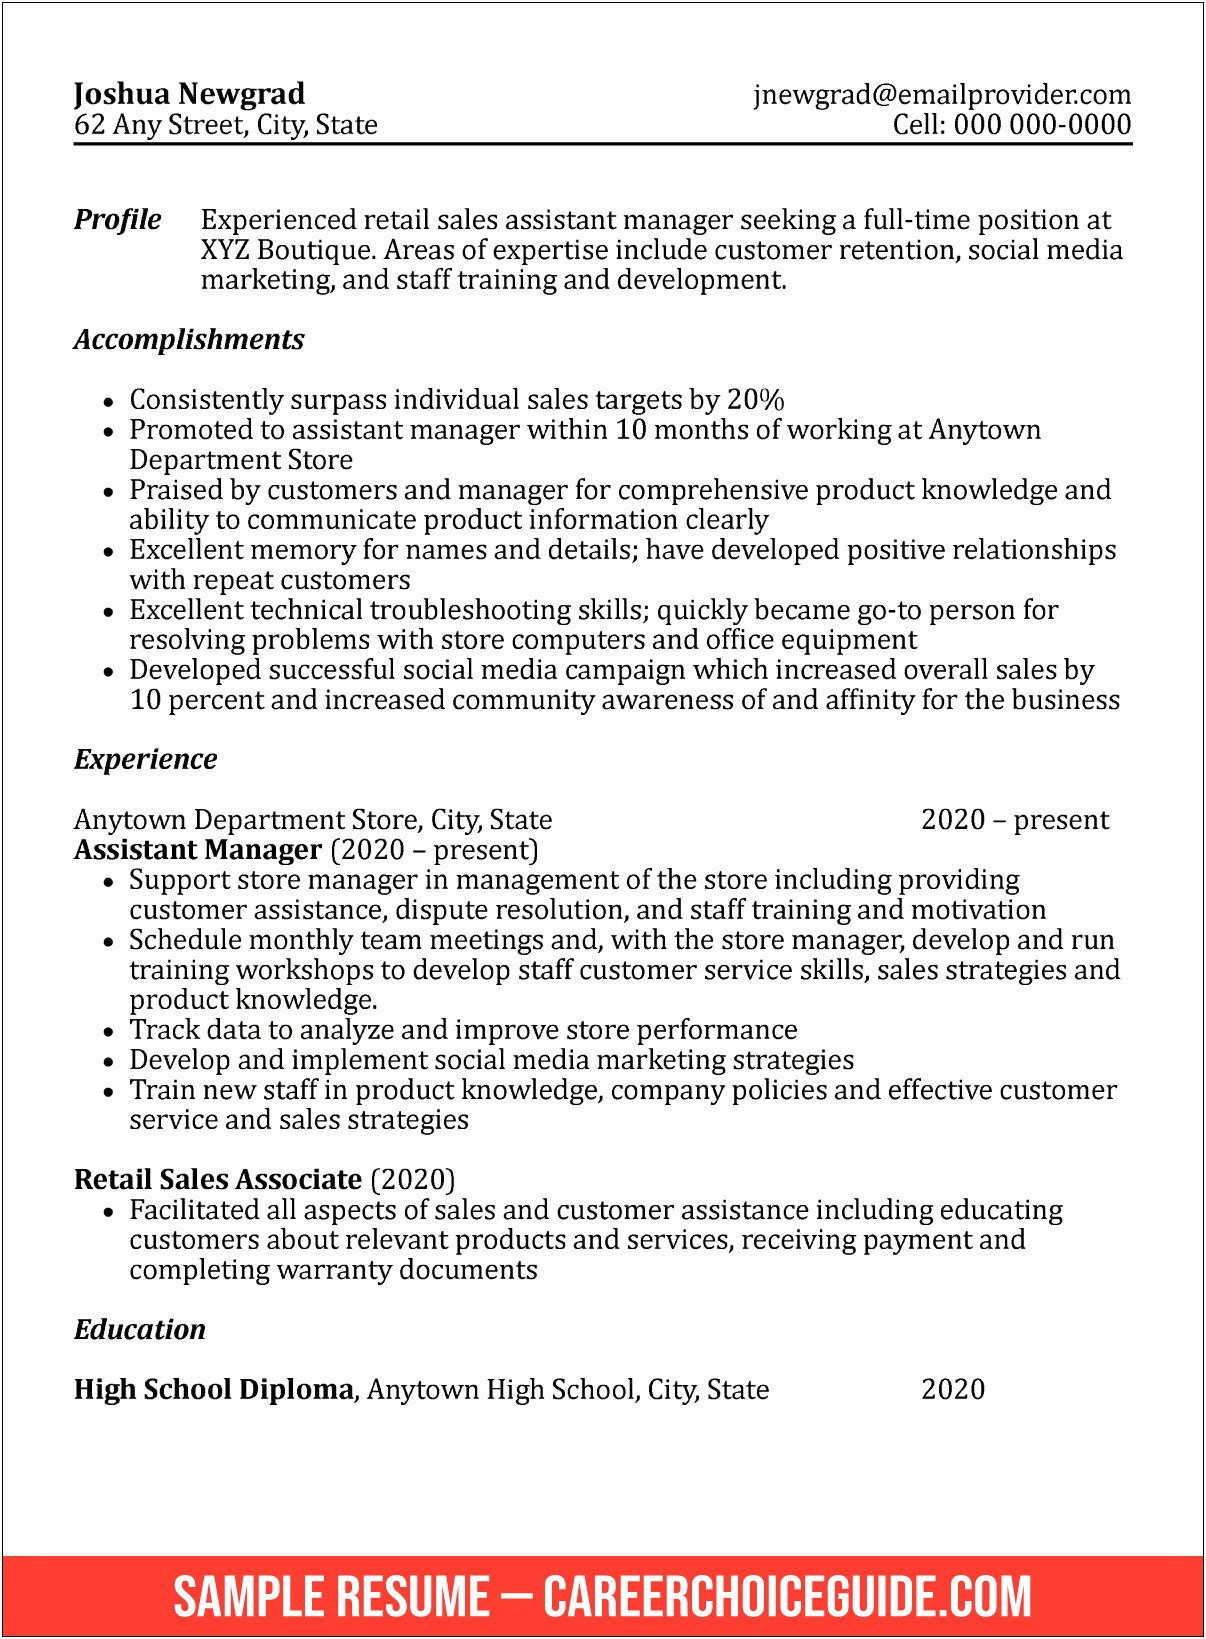 High School Information On A Resume